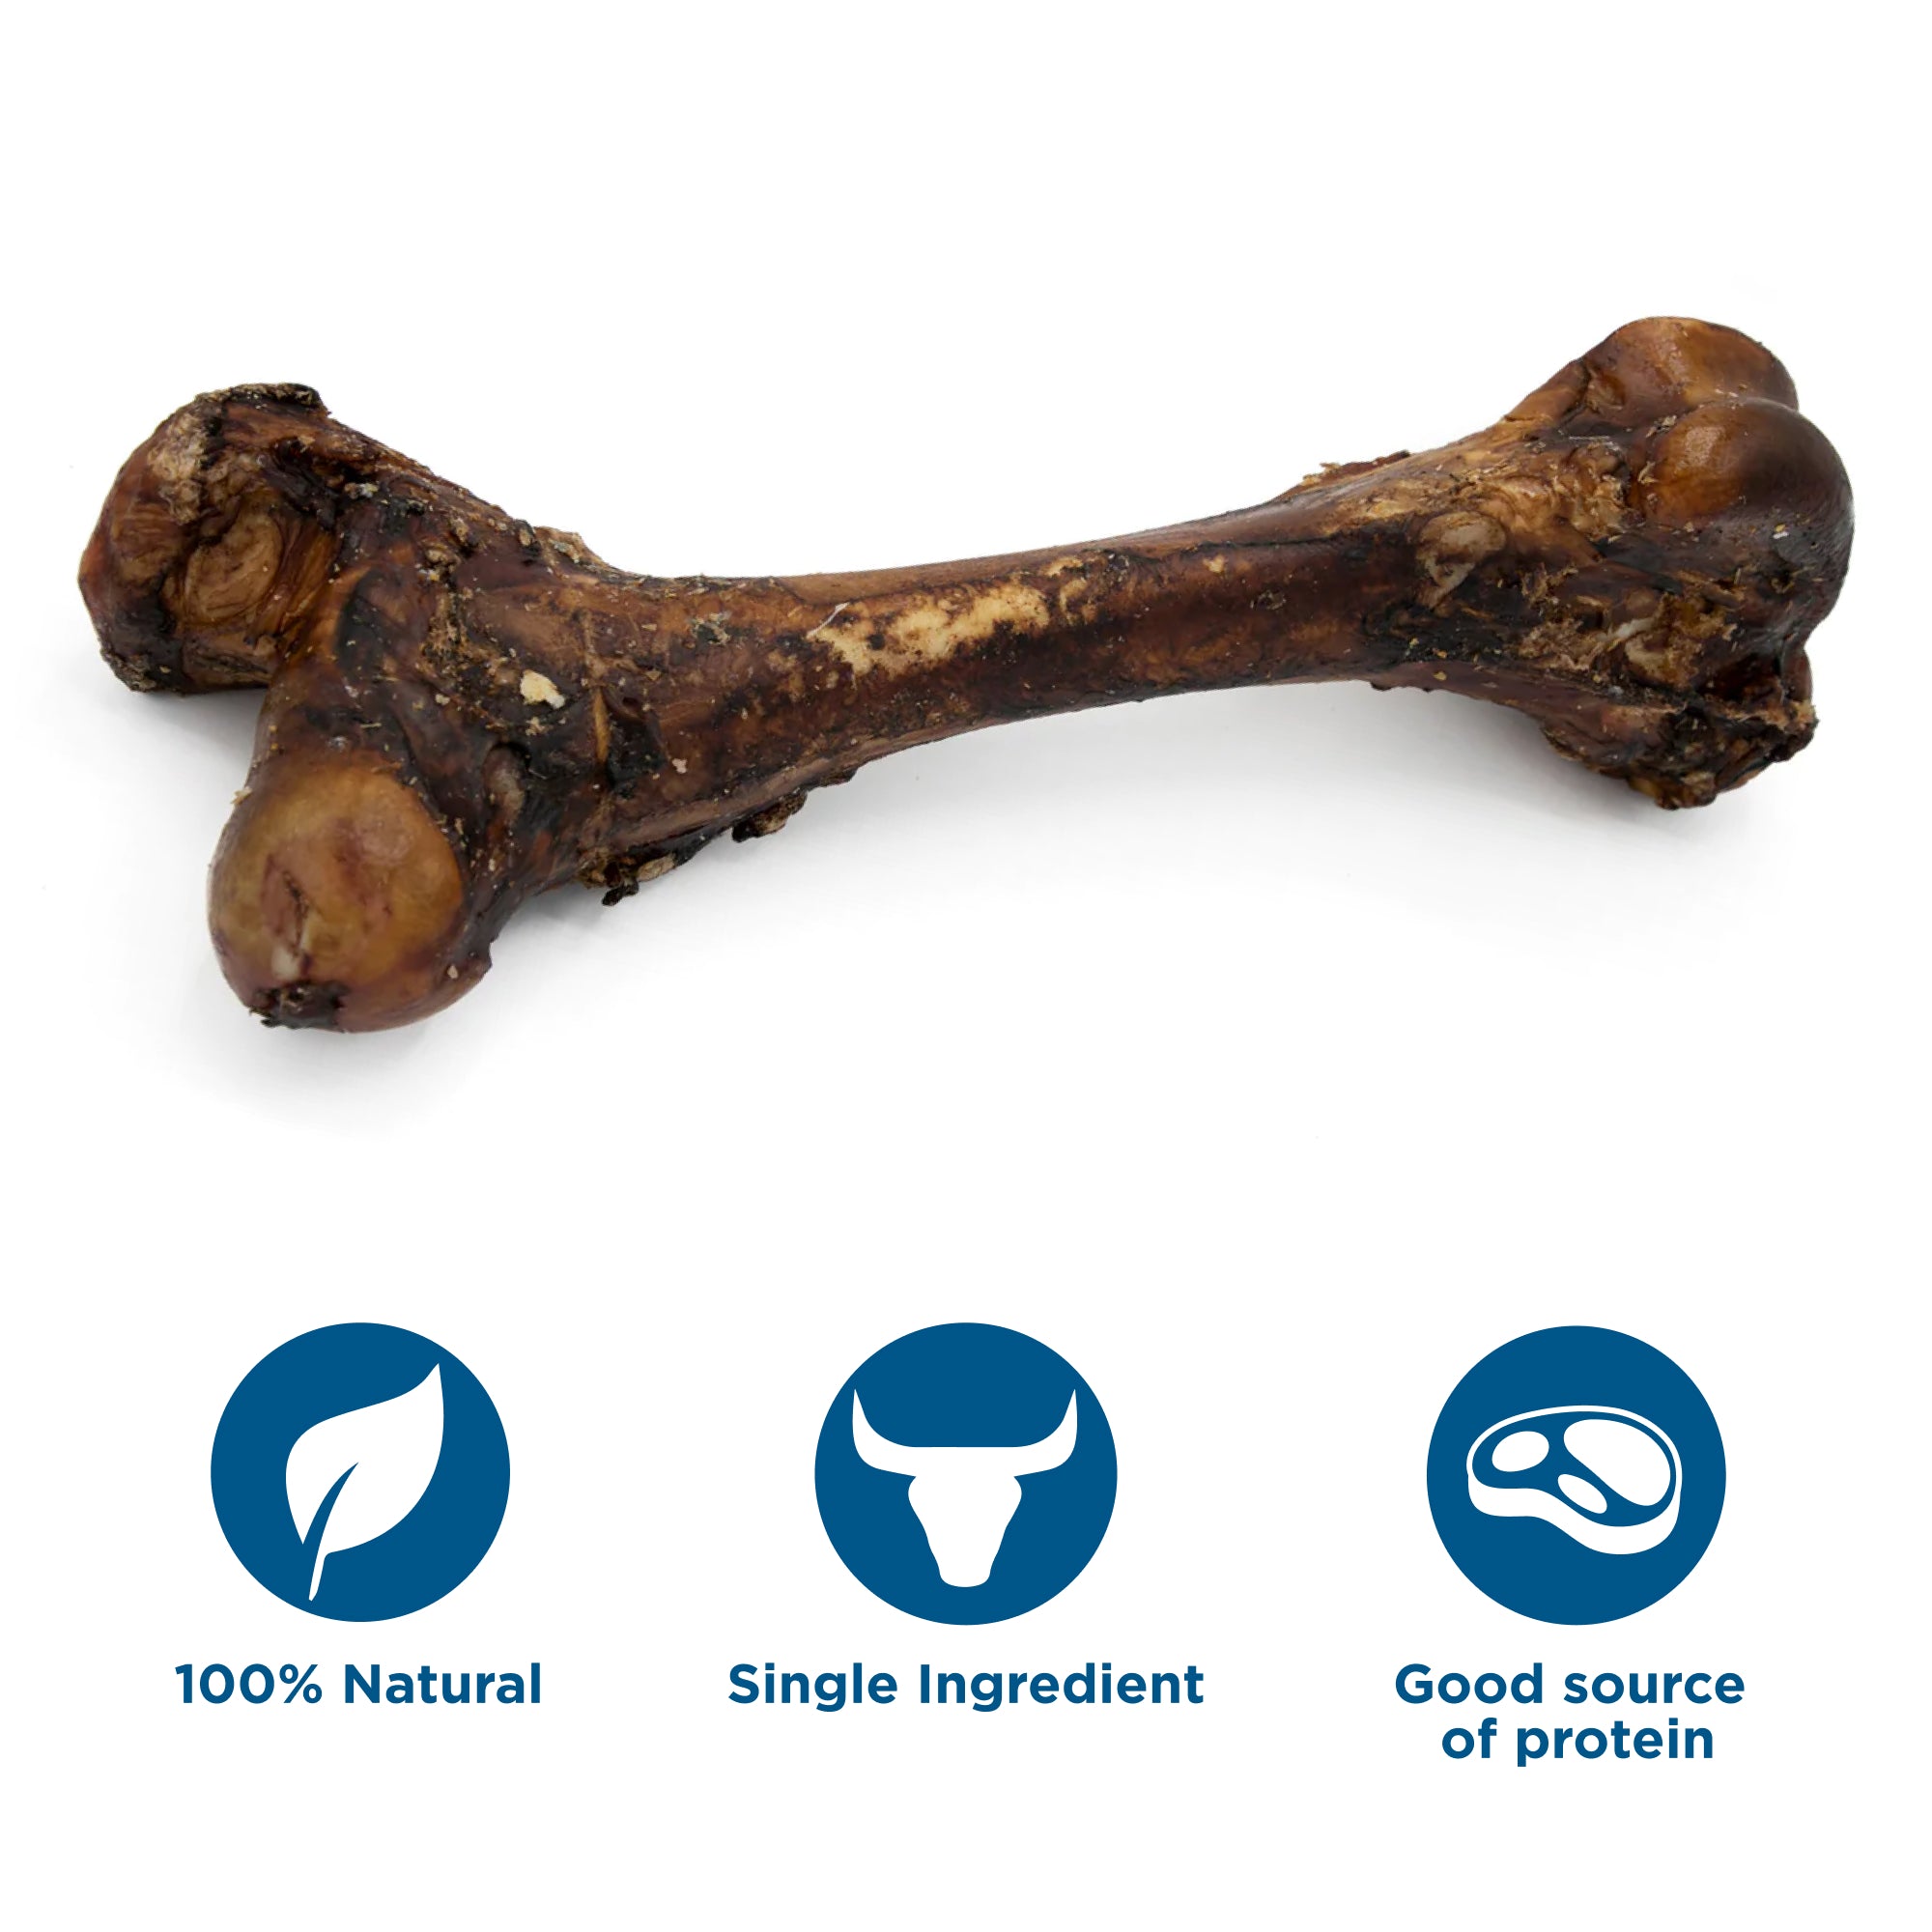 A Monster Femur Bone with the ingredients listed on it from Best Bully Sticks.